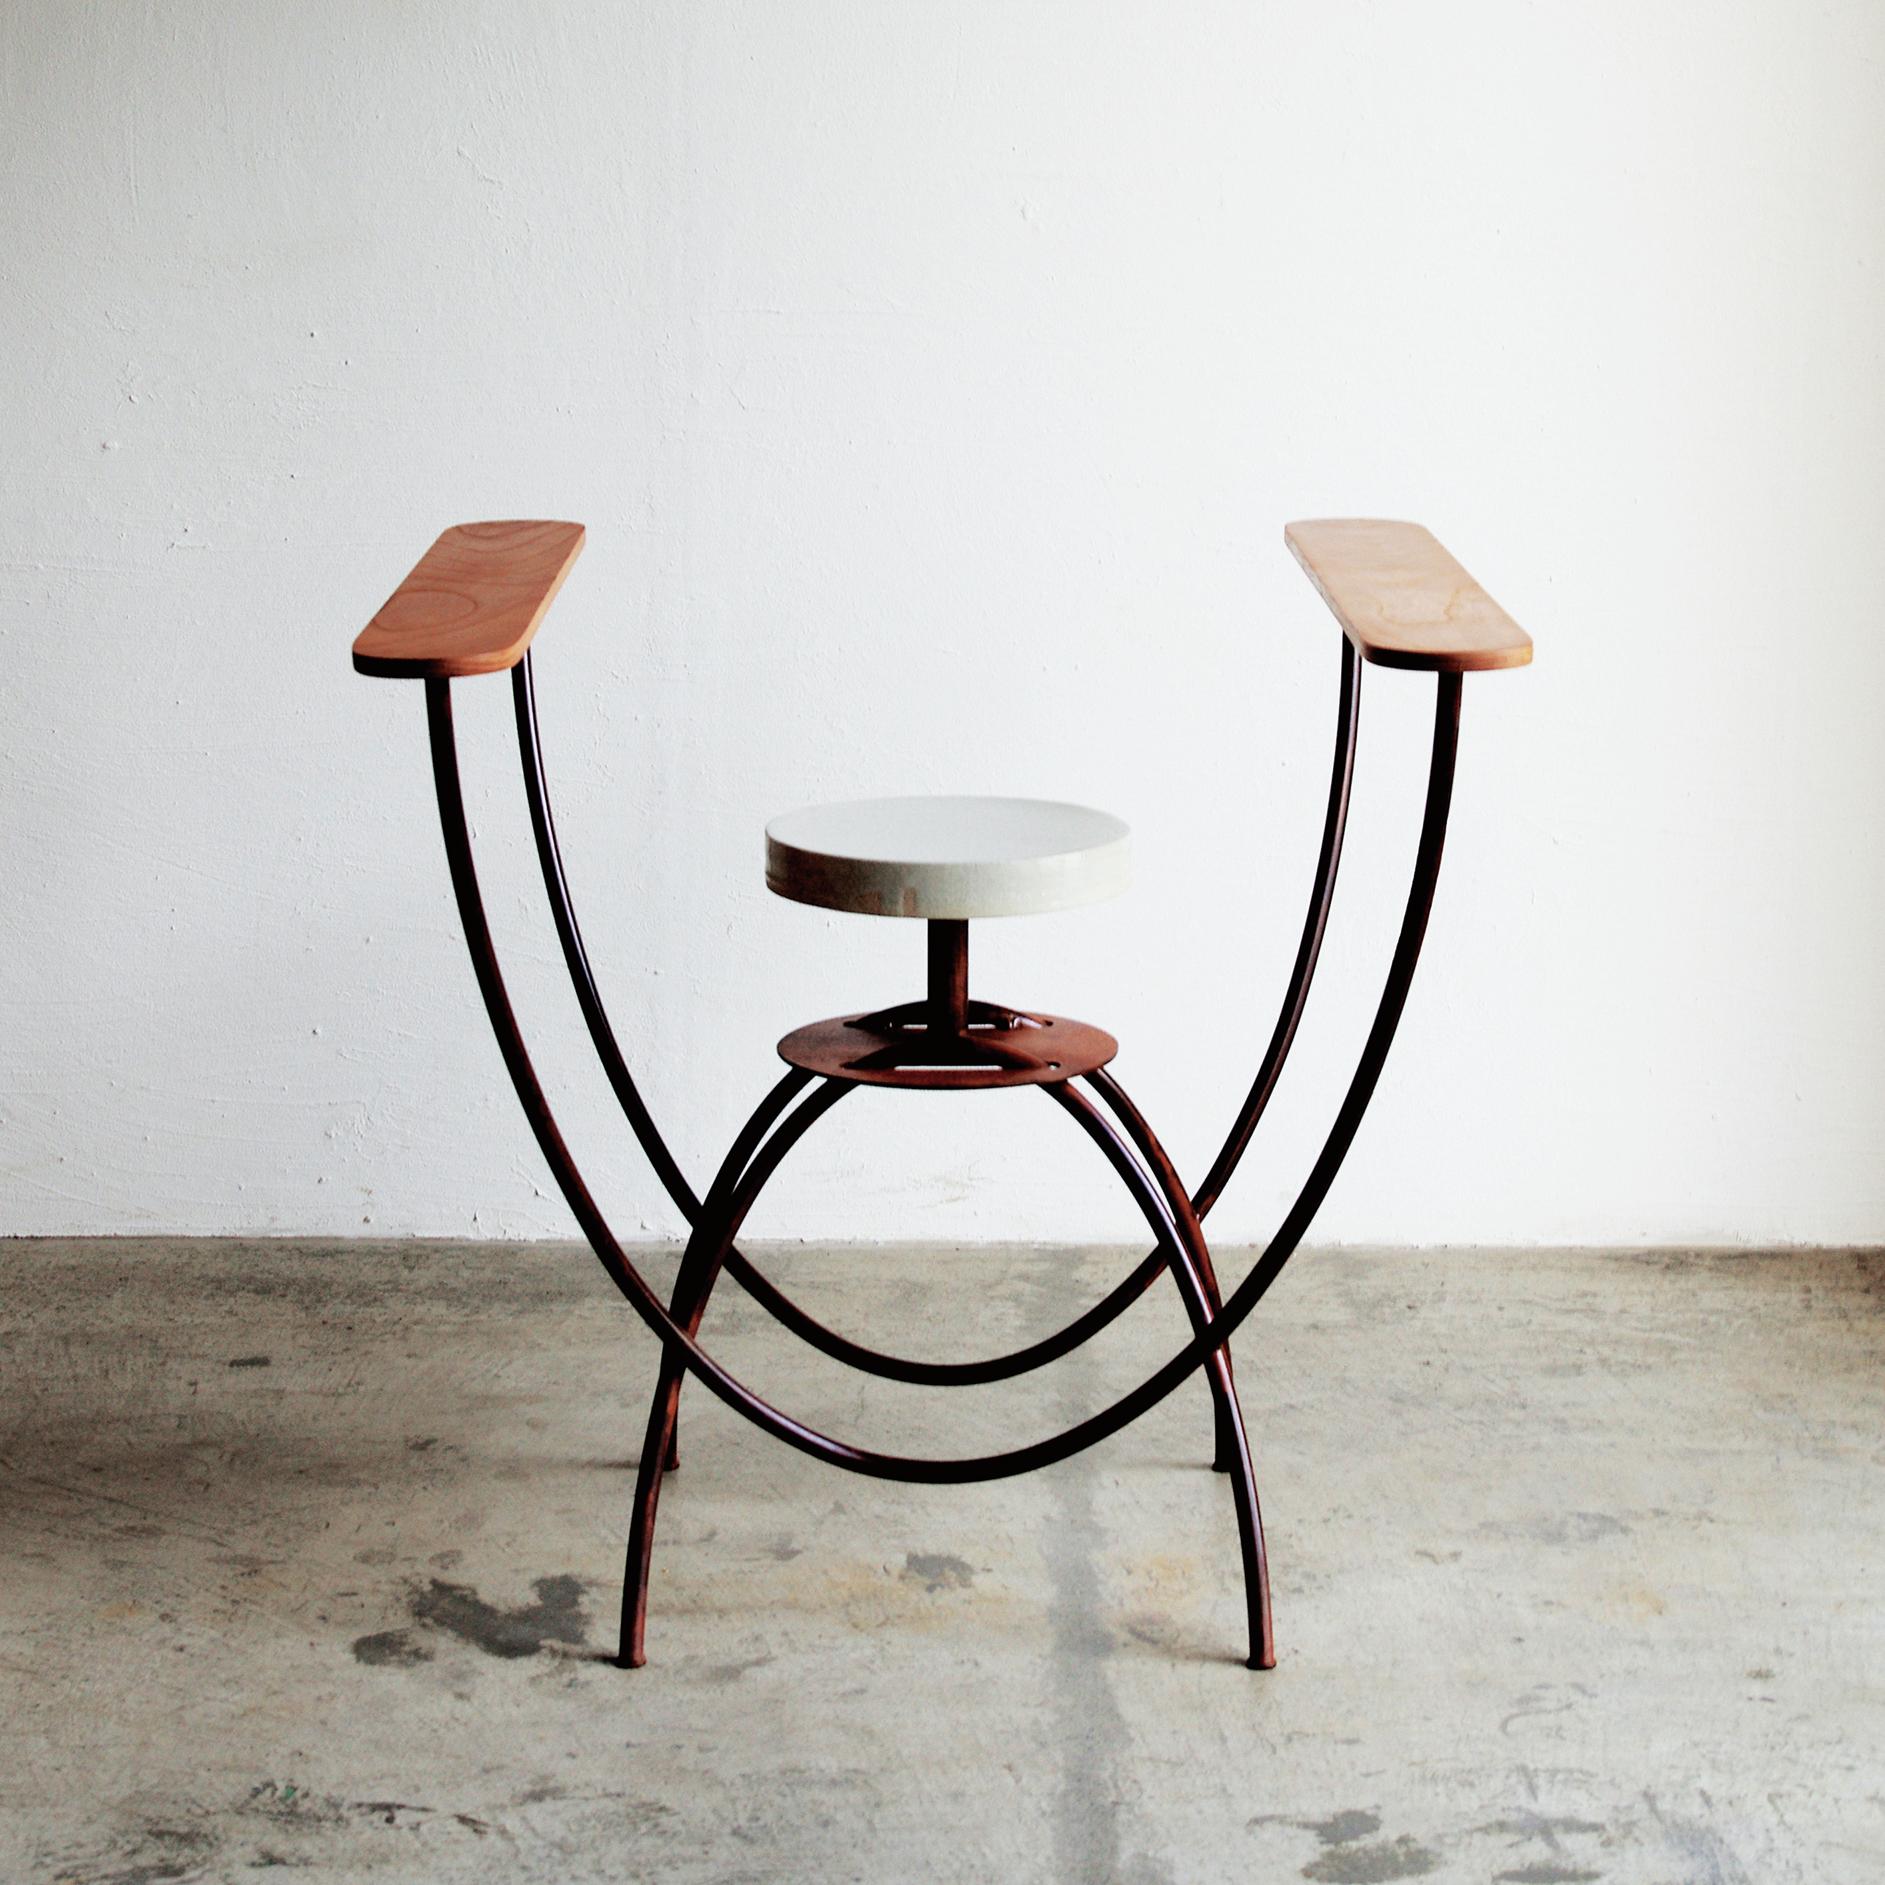 Contemporary Japanese style chair. Rather sculpture than chair. Made of rusted steel, ceramic, and wood. Base is steel. Seat is ceramic. Arm panels are made of wood.
  